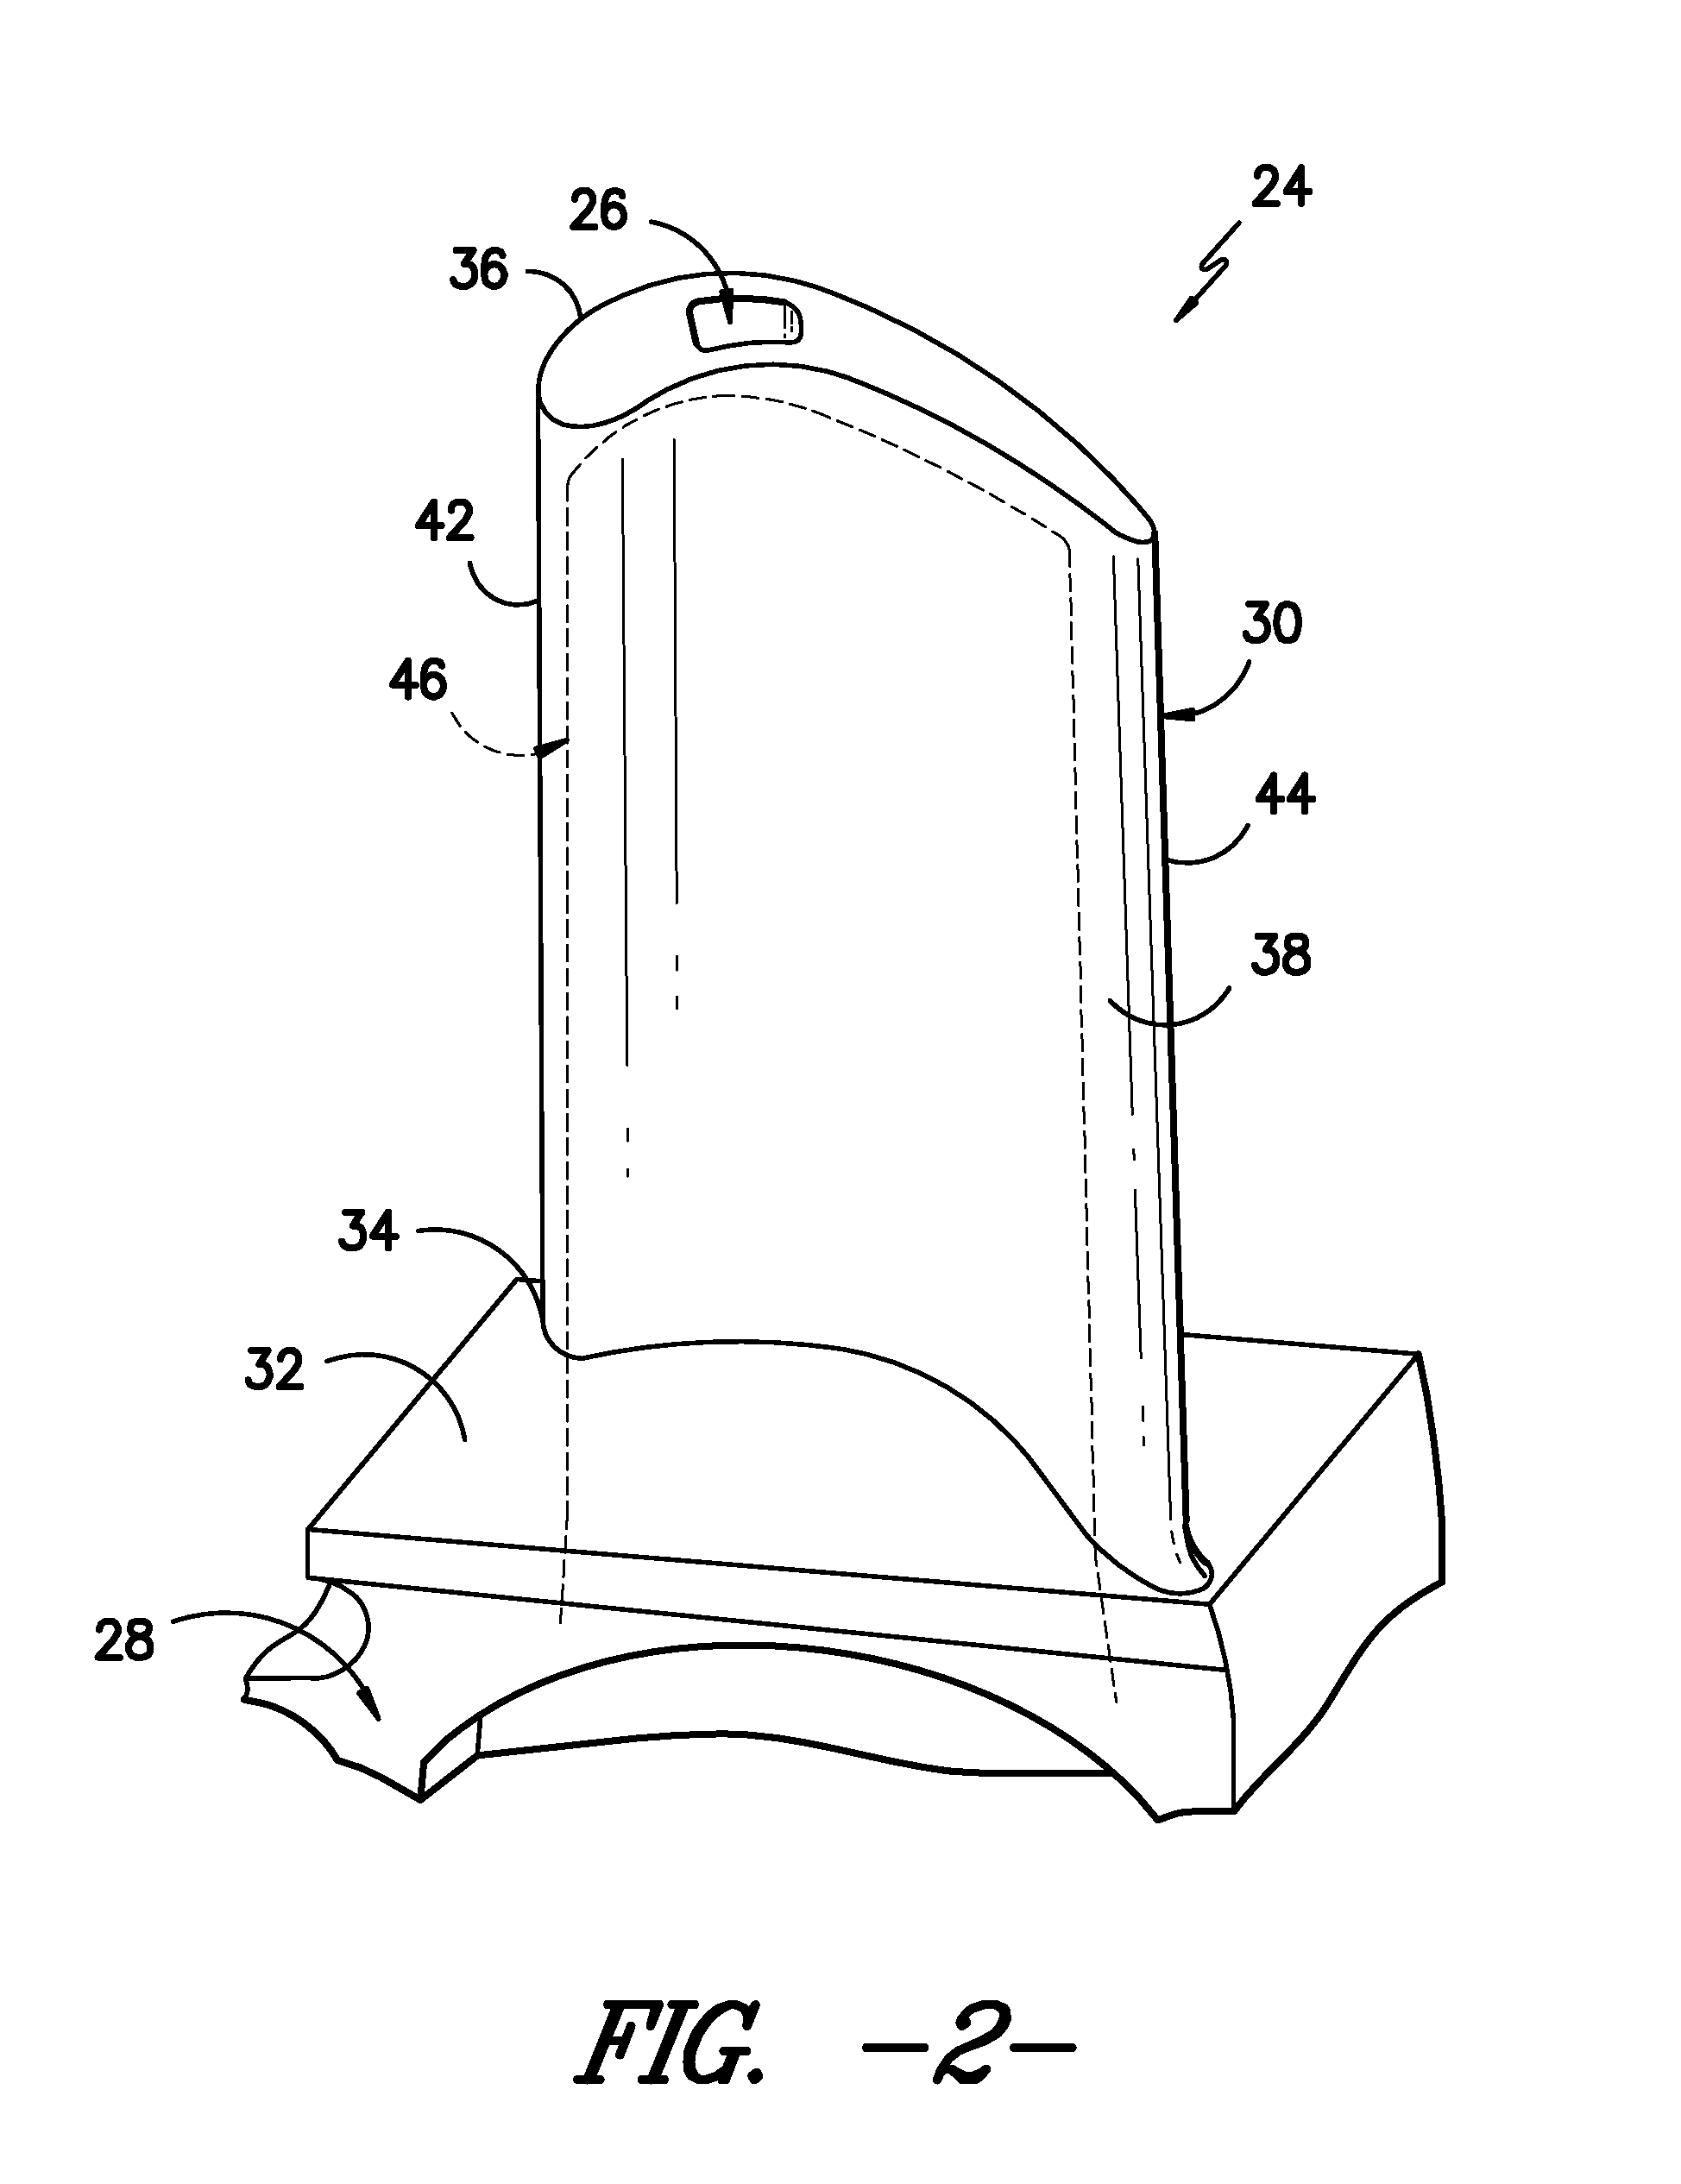 Methods for repairing a turbine airfoil constructed from cmc material